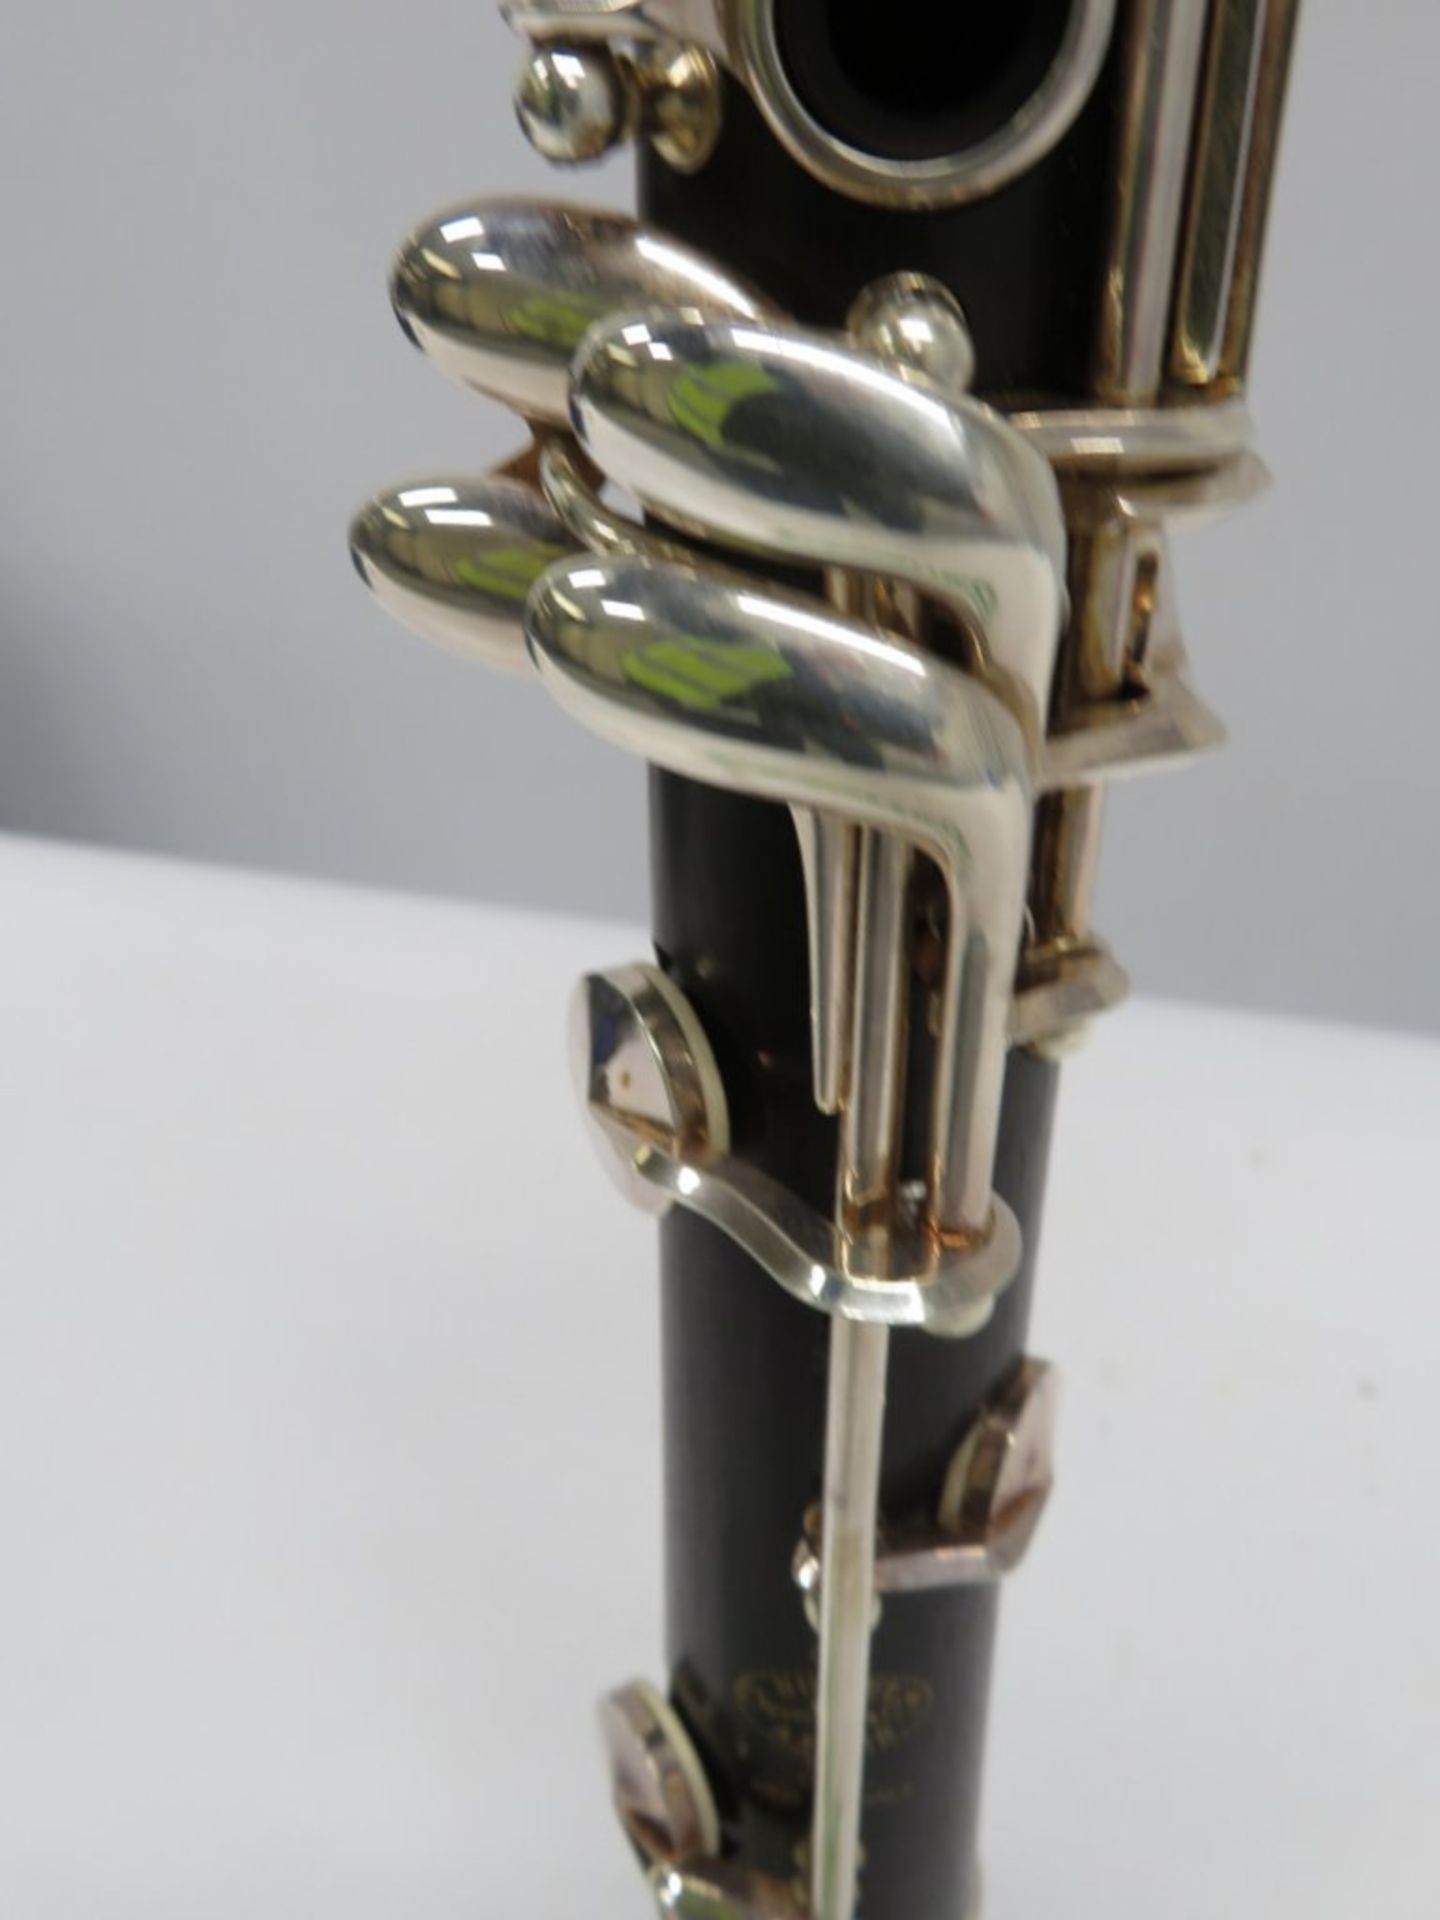 Buffet Crampon Clarinet Complete With Case. - Image 9 of 19